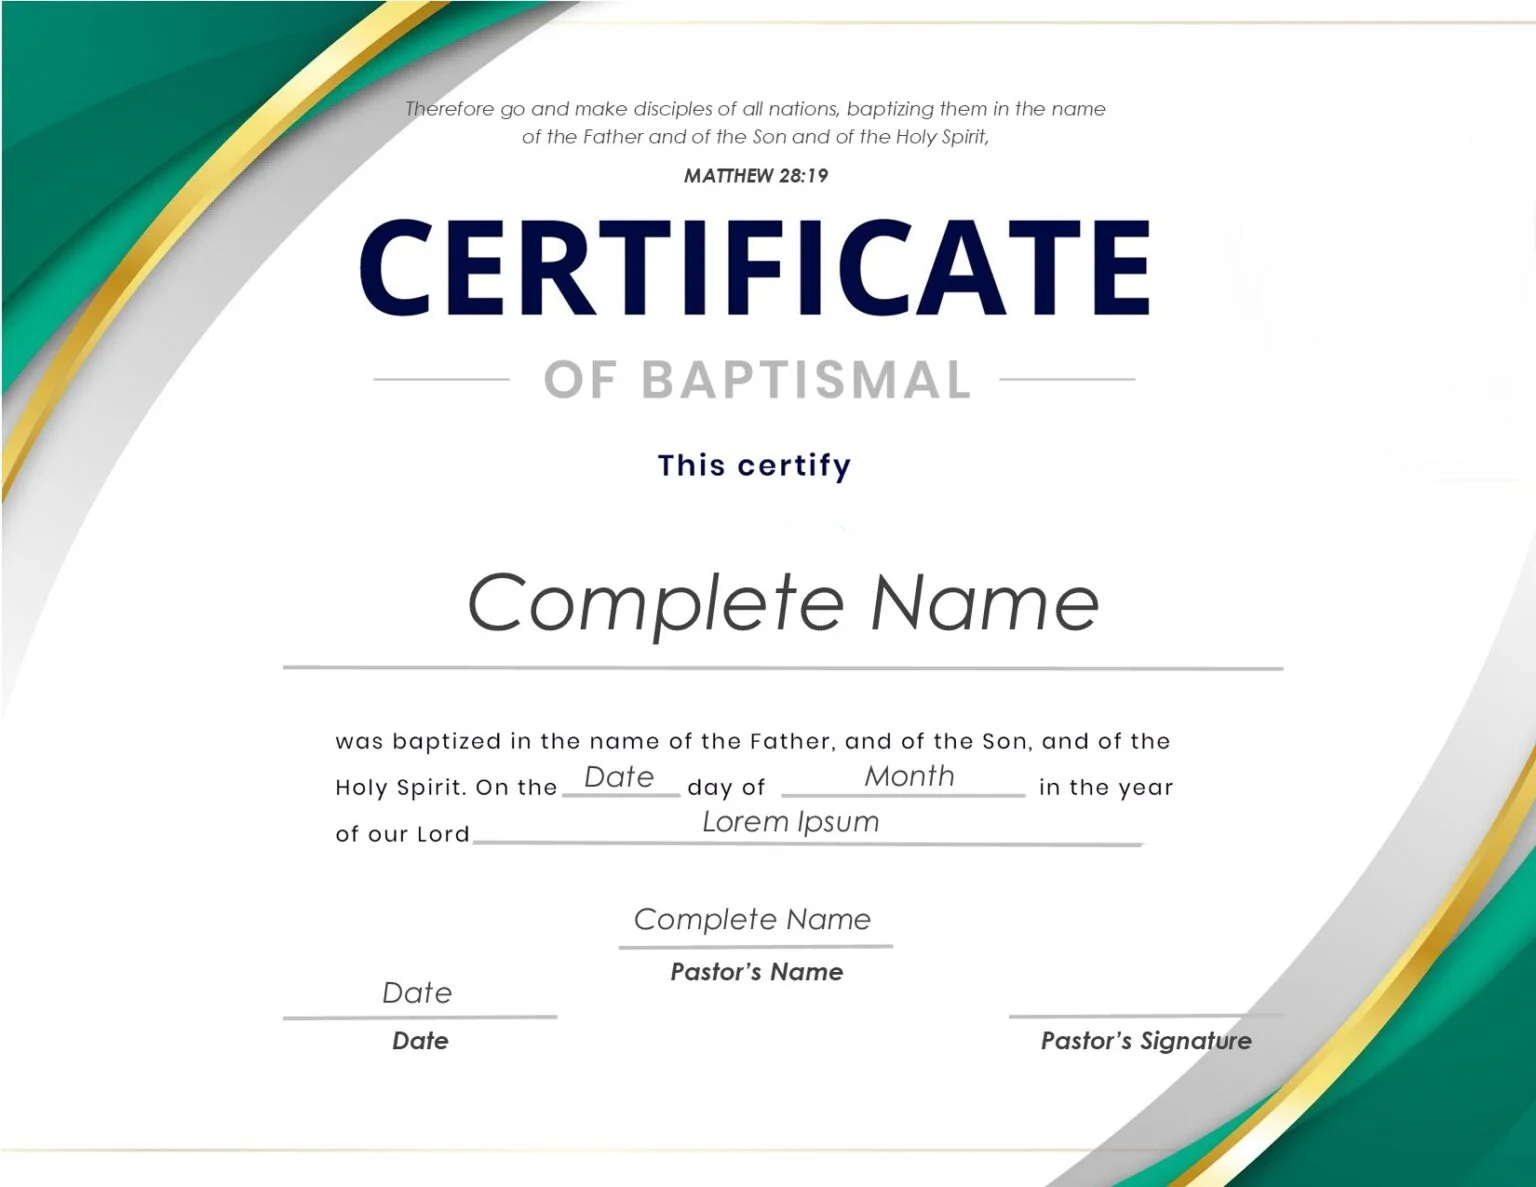 Baptismal Certificate - Free Baptism Certificate Template 1 by Ministry Voice